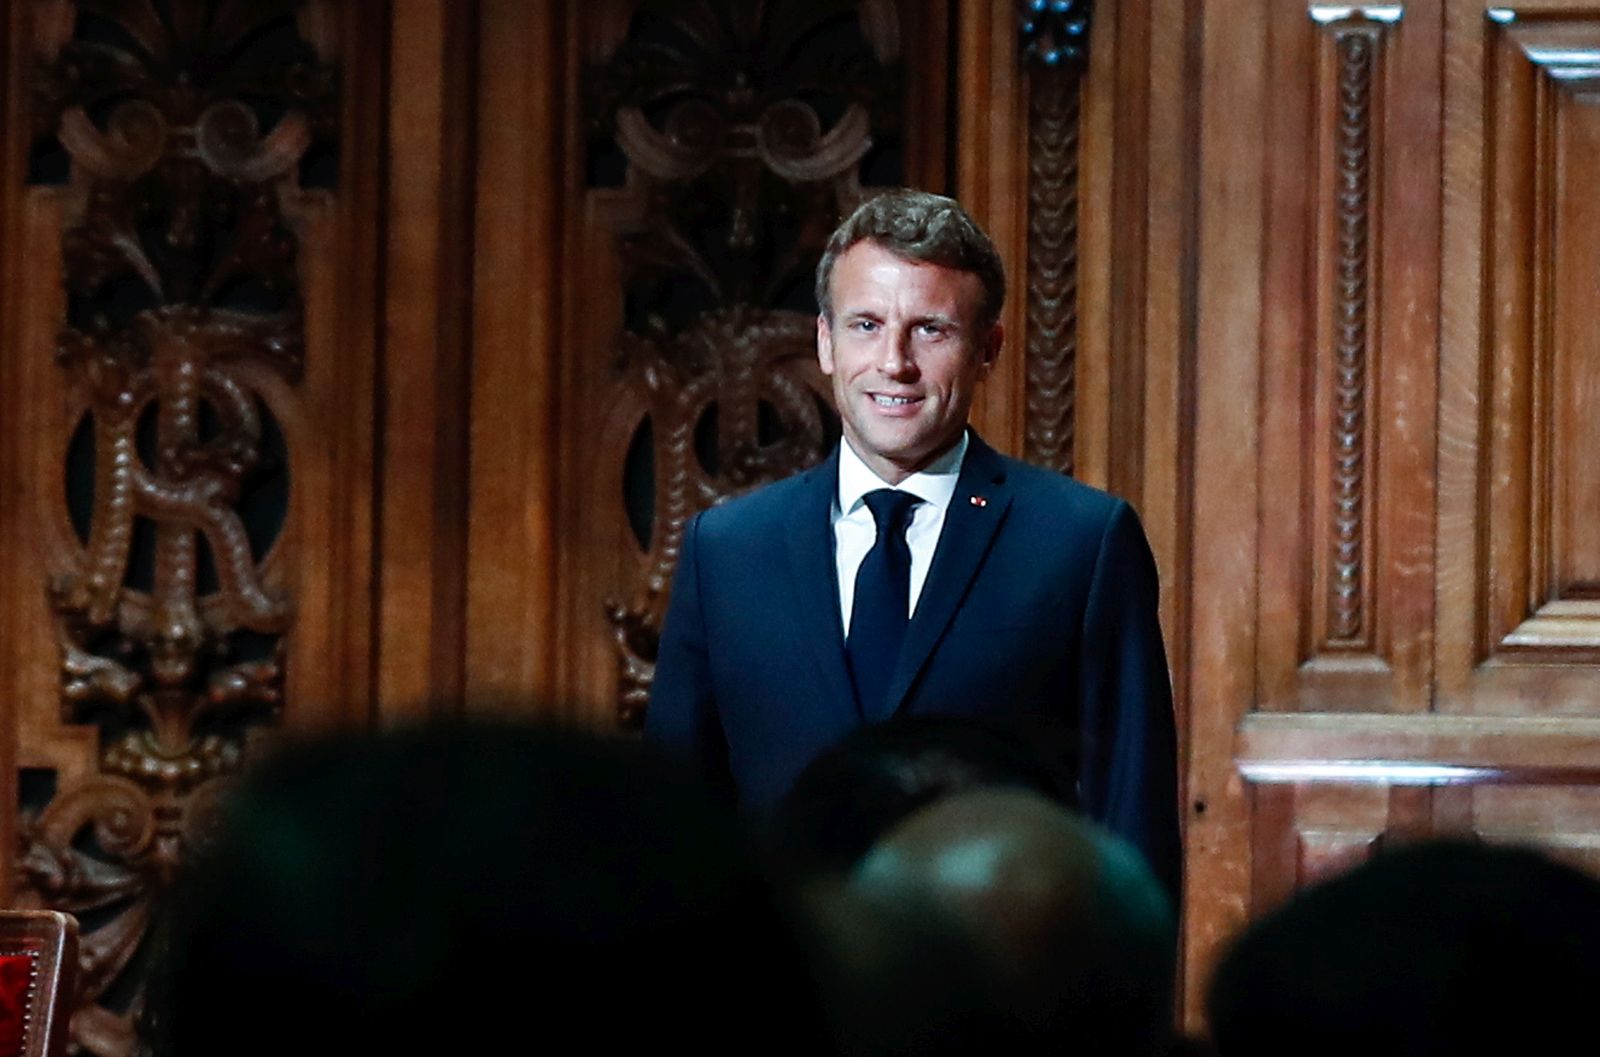 epa10137485 French President Emmanuel Macron (C) and State Secretary for Youth and National Education Sarah El Hairy (L), arrive to the amphitheater of the Sorbonne University in Paris, France, 25 August 2022. French President Emmanuel Macron makes trip to the Sorbonne University at the opening of the back-to-school meeting of rectors, as France is struggling to recruit enough teachers. This visit is the first by a President of the Republic to take part in such an event.  EPA/MOHAMMED BADRA / POOL